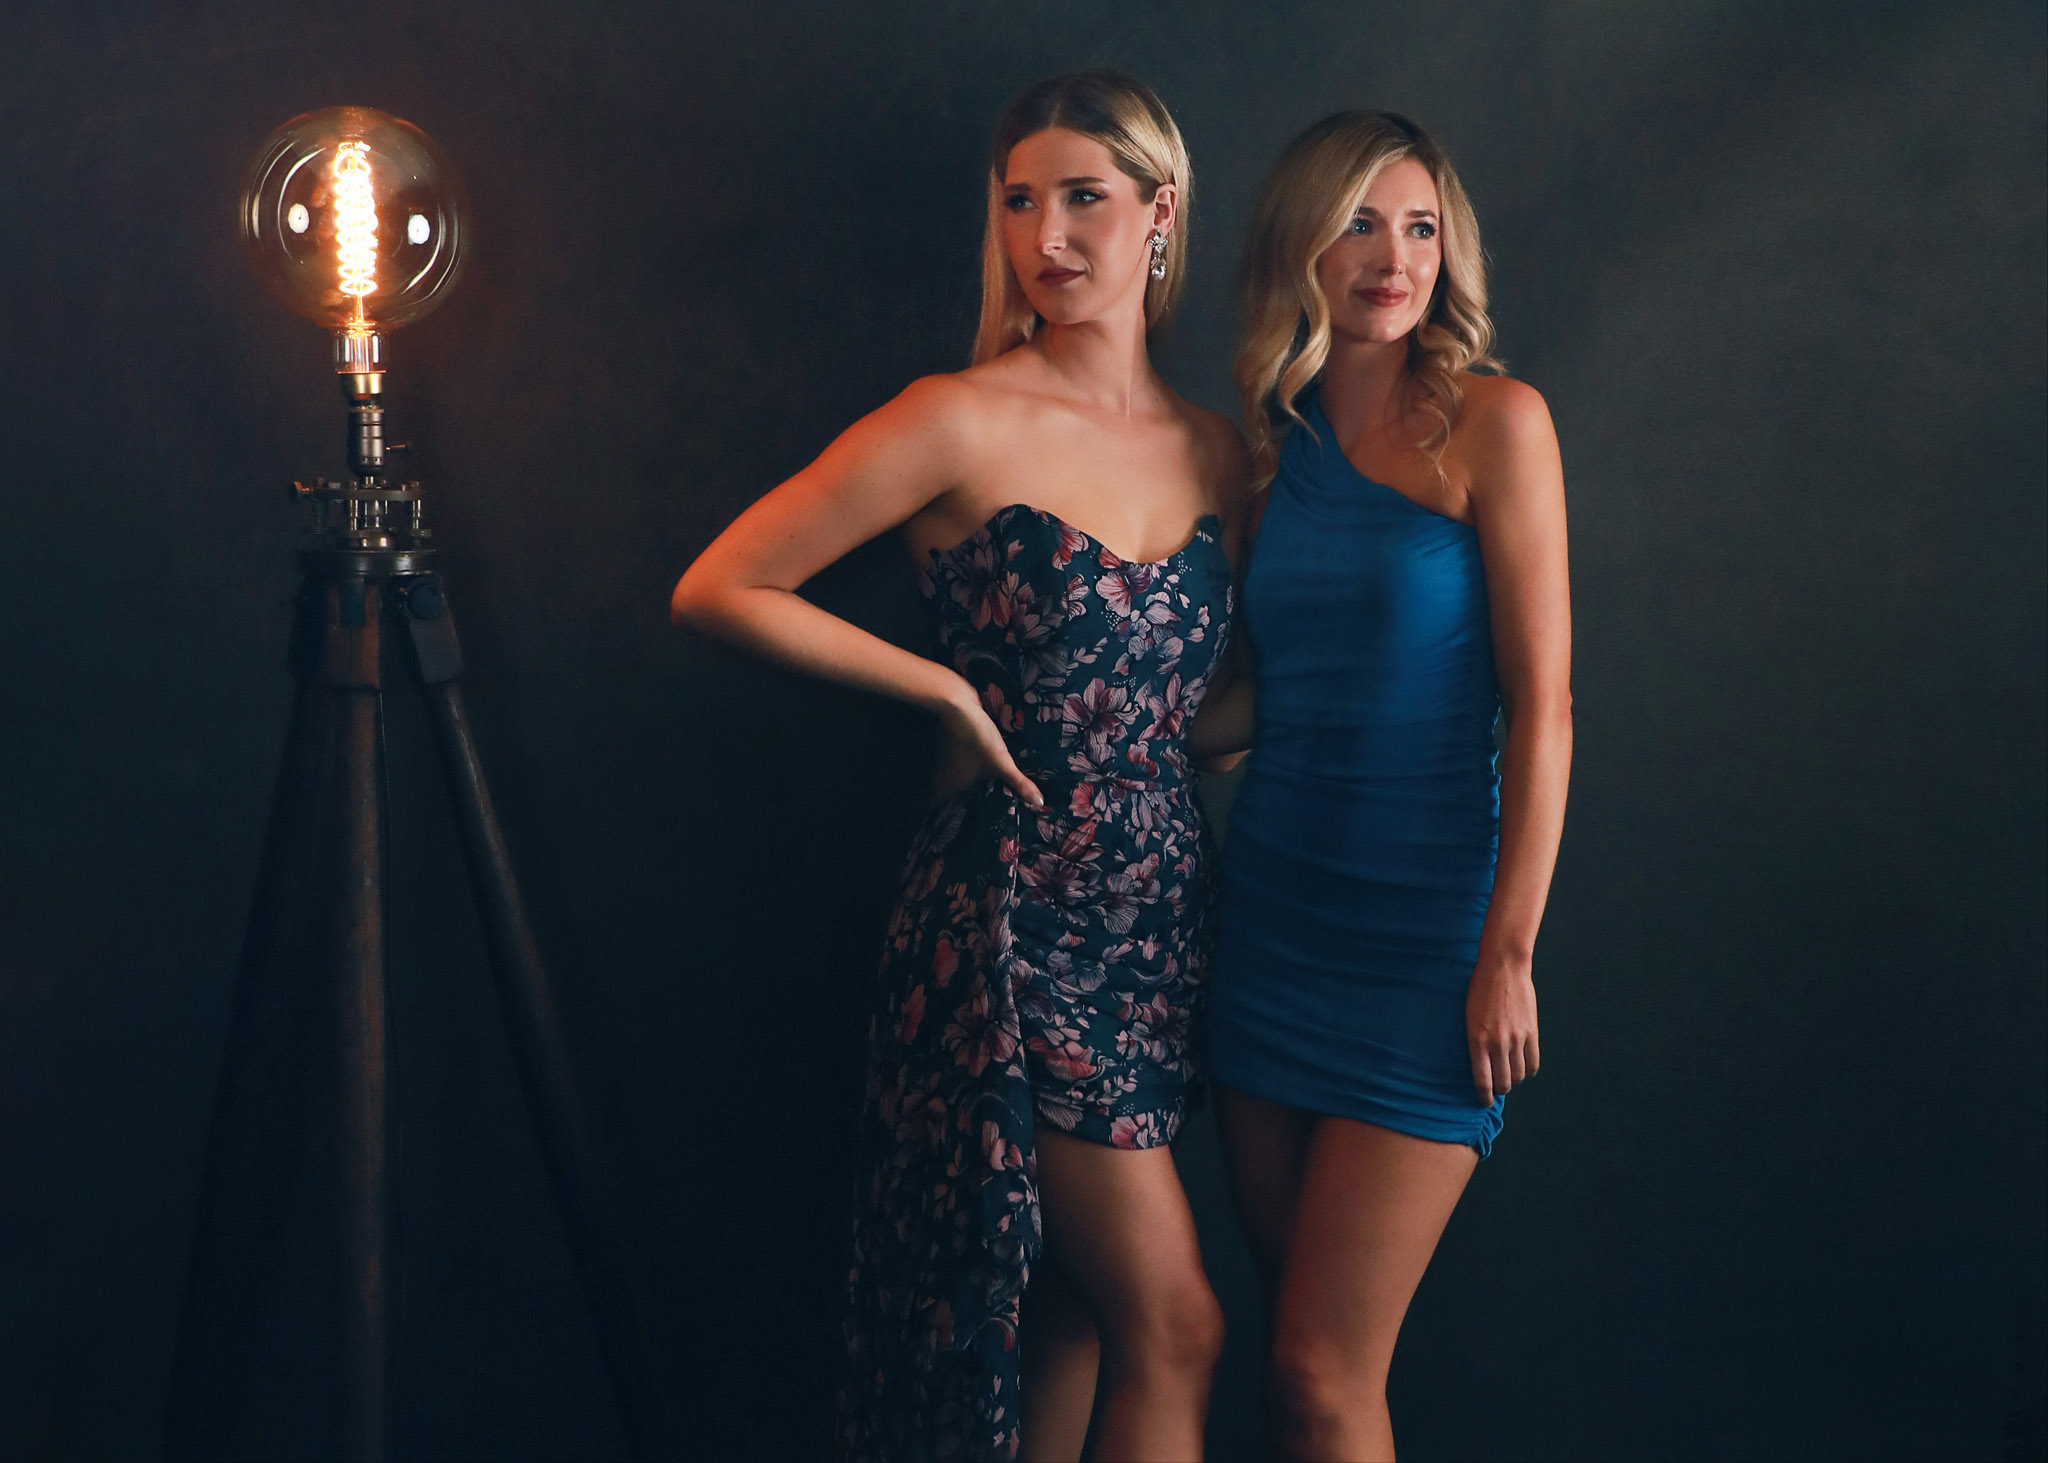 two Dallas women in ballgowns posed in a dramatic fashion next to an antique custom lamp on a dark handpainted backdrop